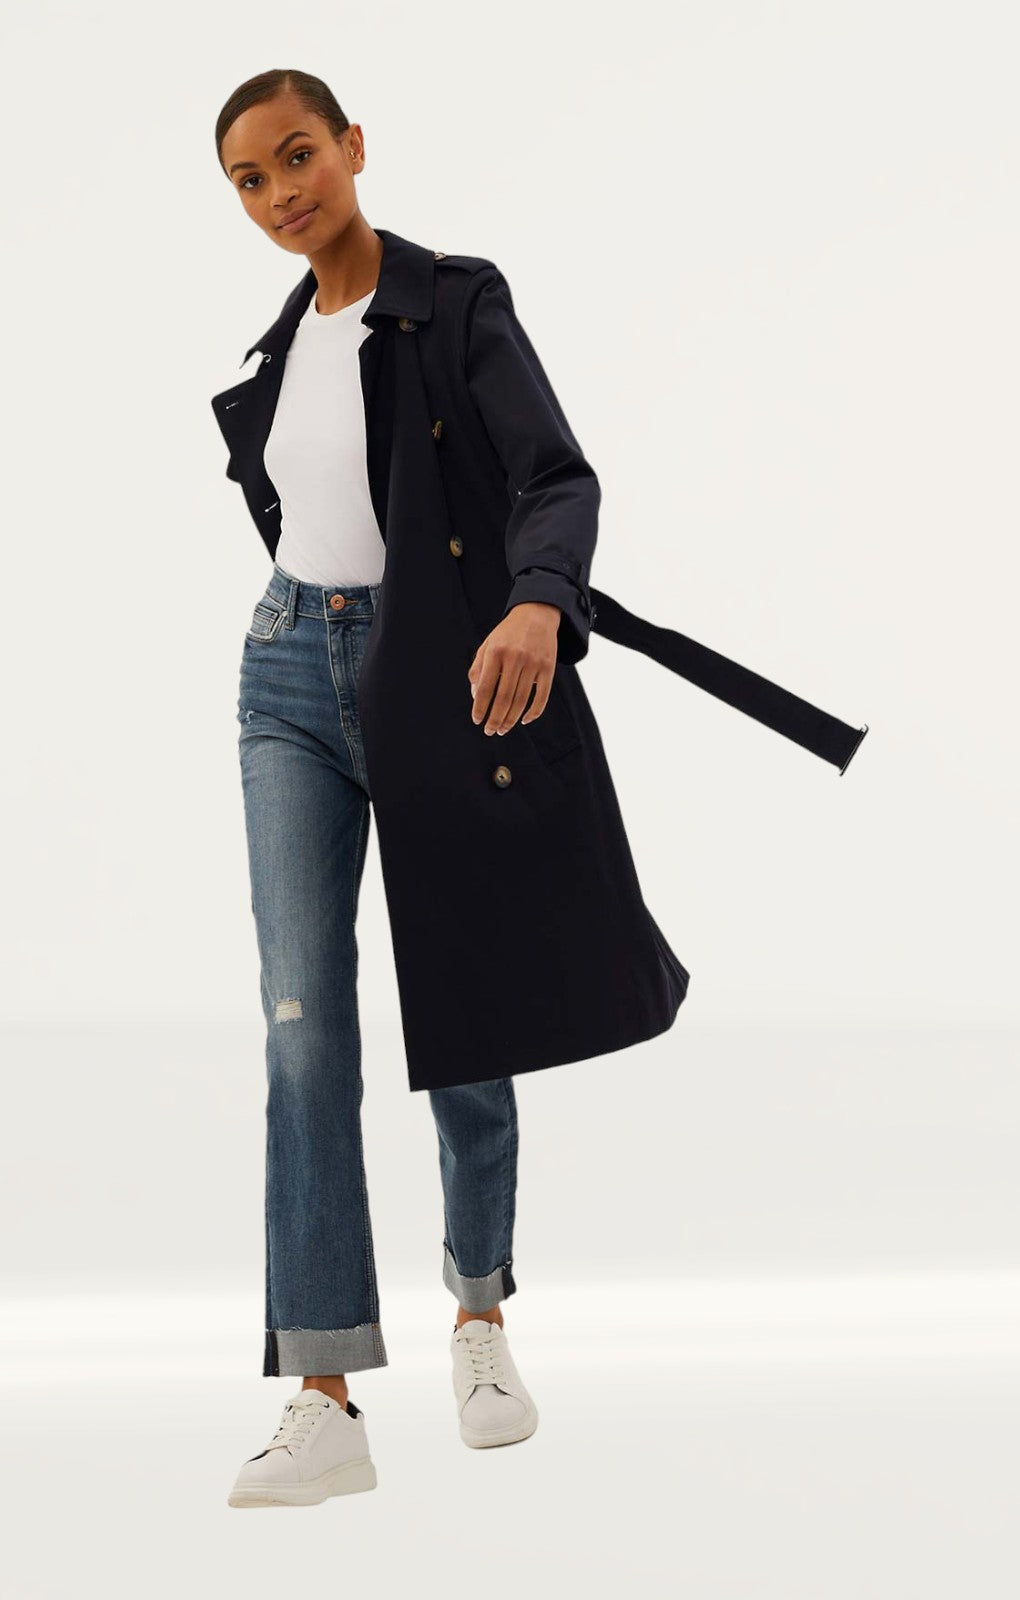 M&S Black Essential Trench